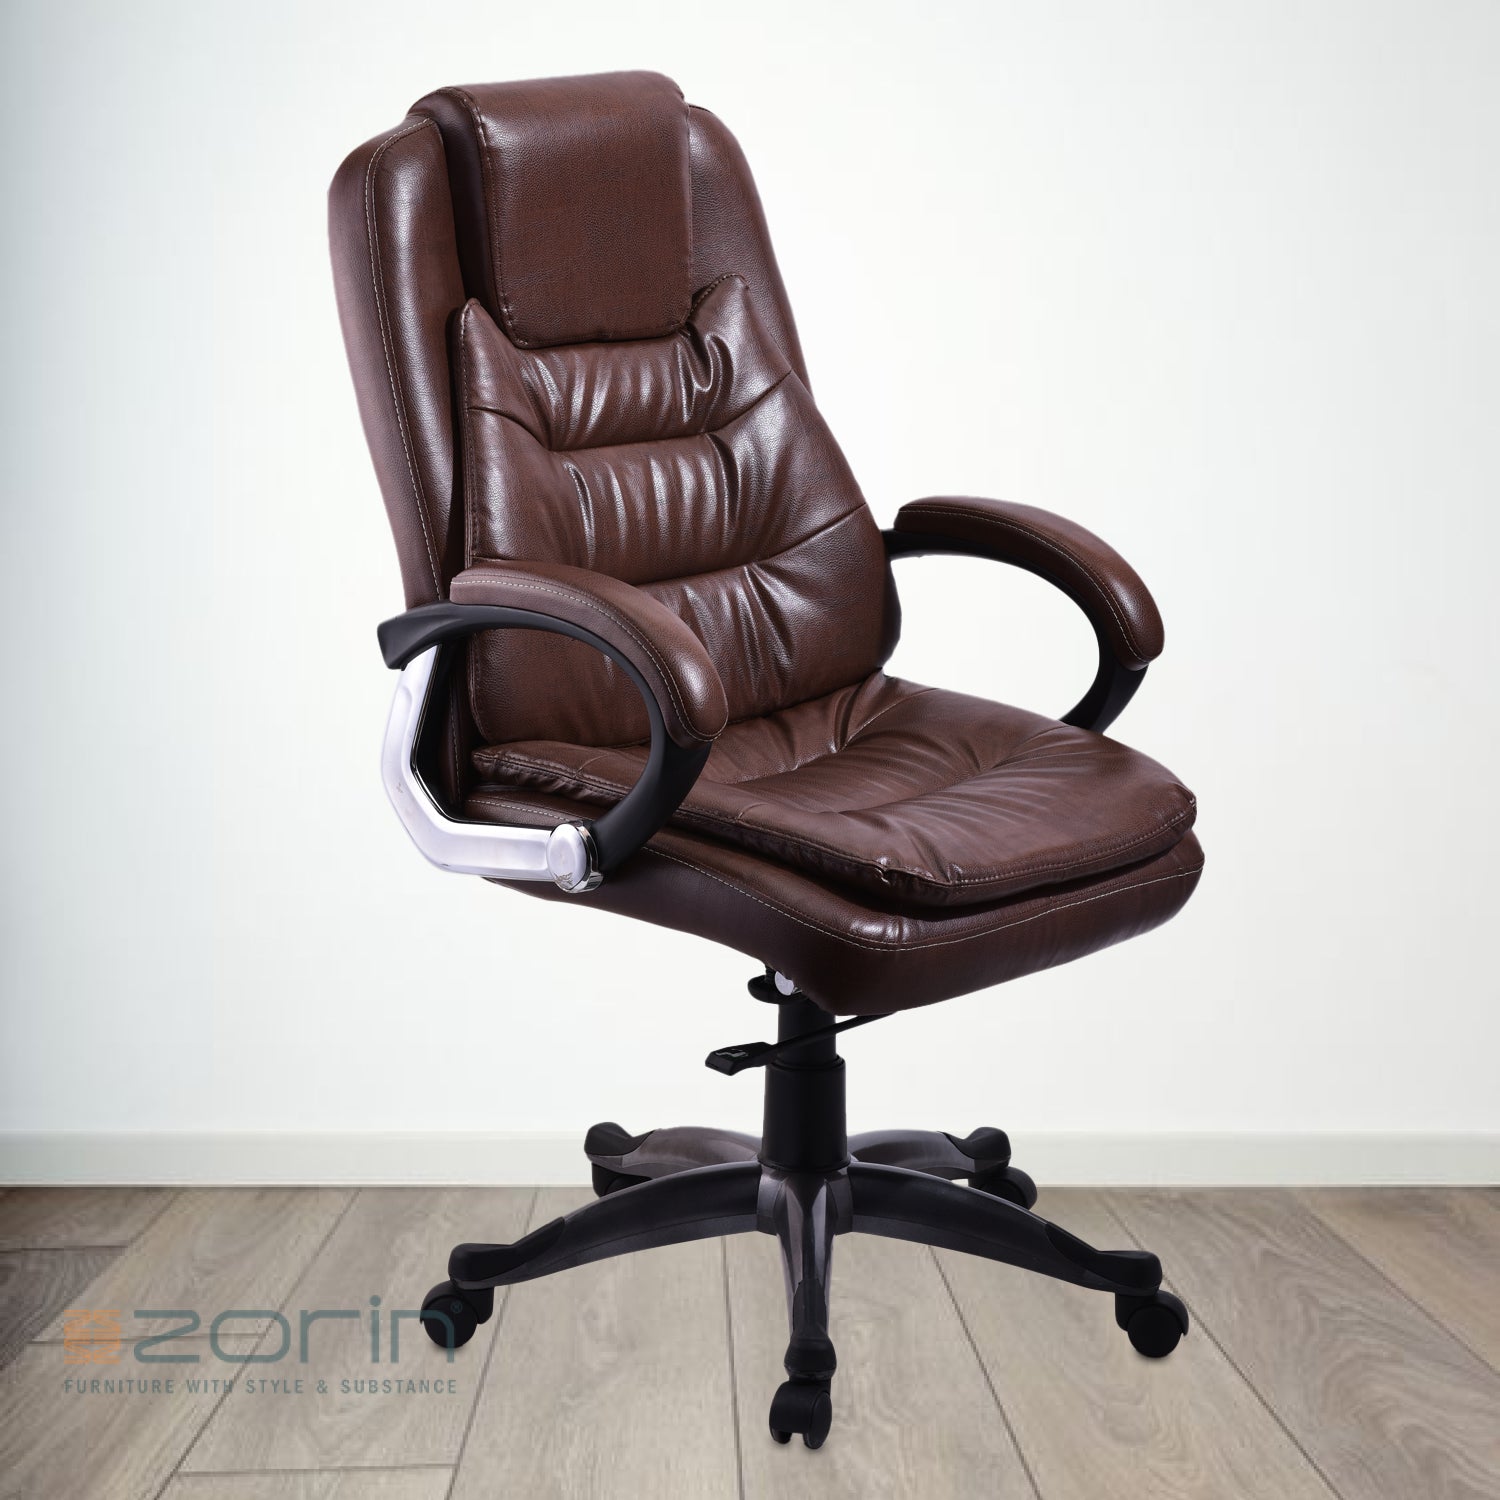 ZSE1037 Medium Back Chair by Zorin in Brown Color Zorin